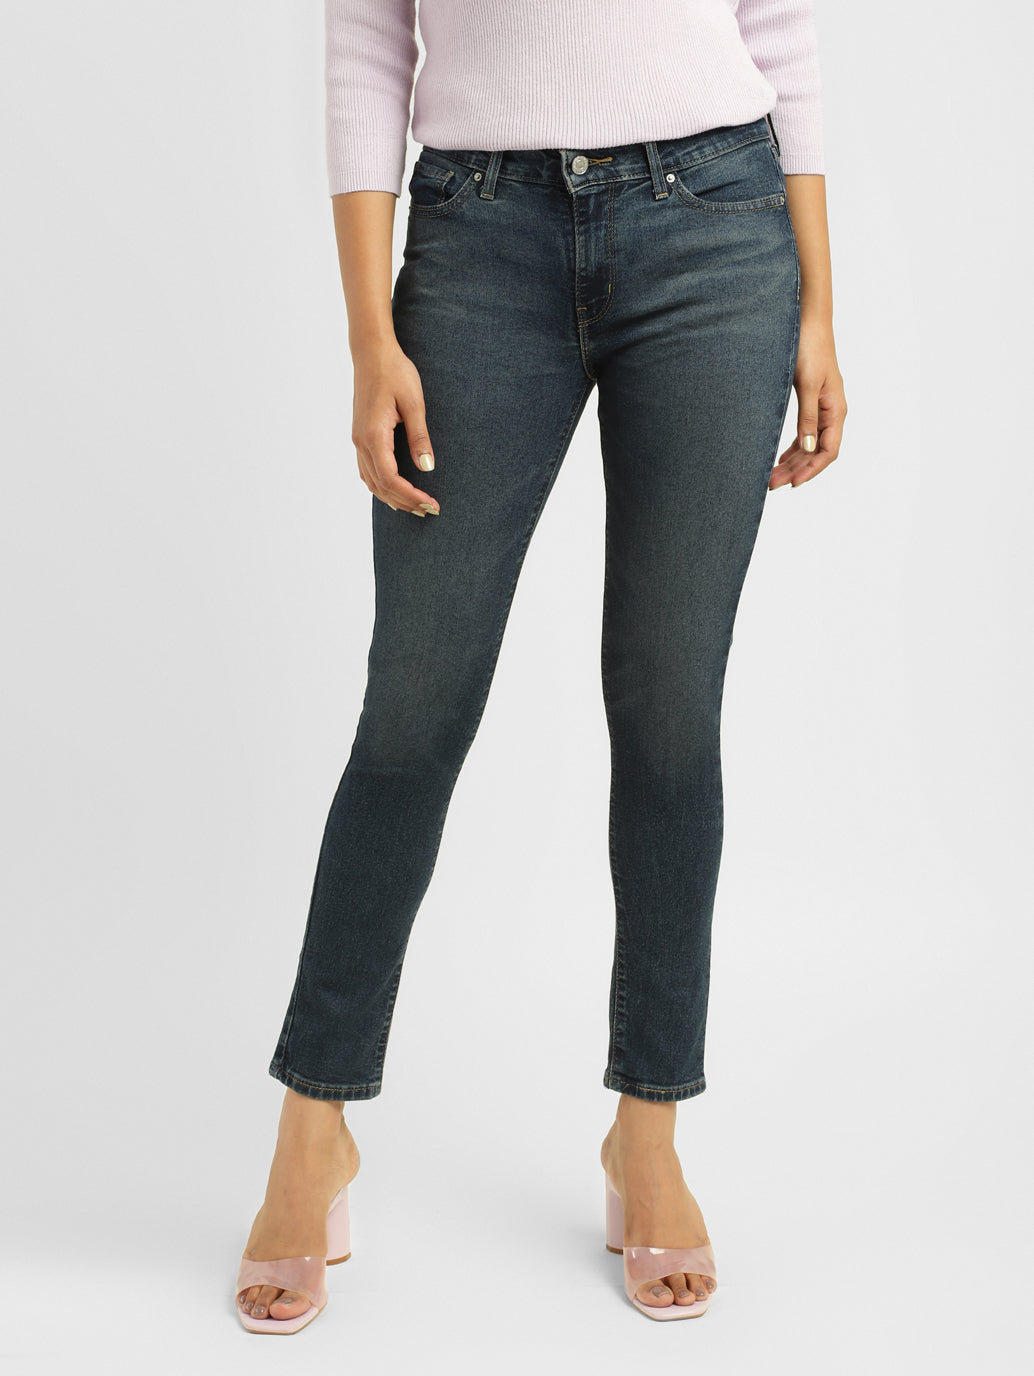 Target's Fall Fashion Sale Has Sweaters and Levi's Jeans for 30% Off